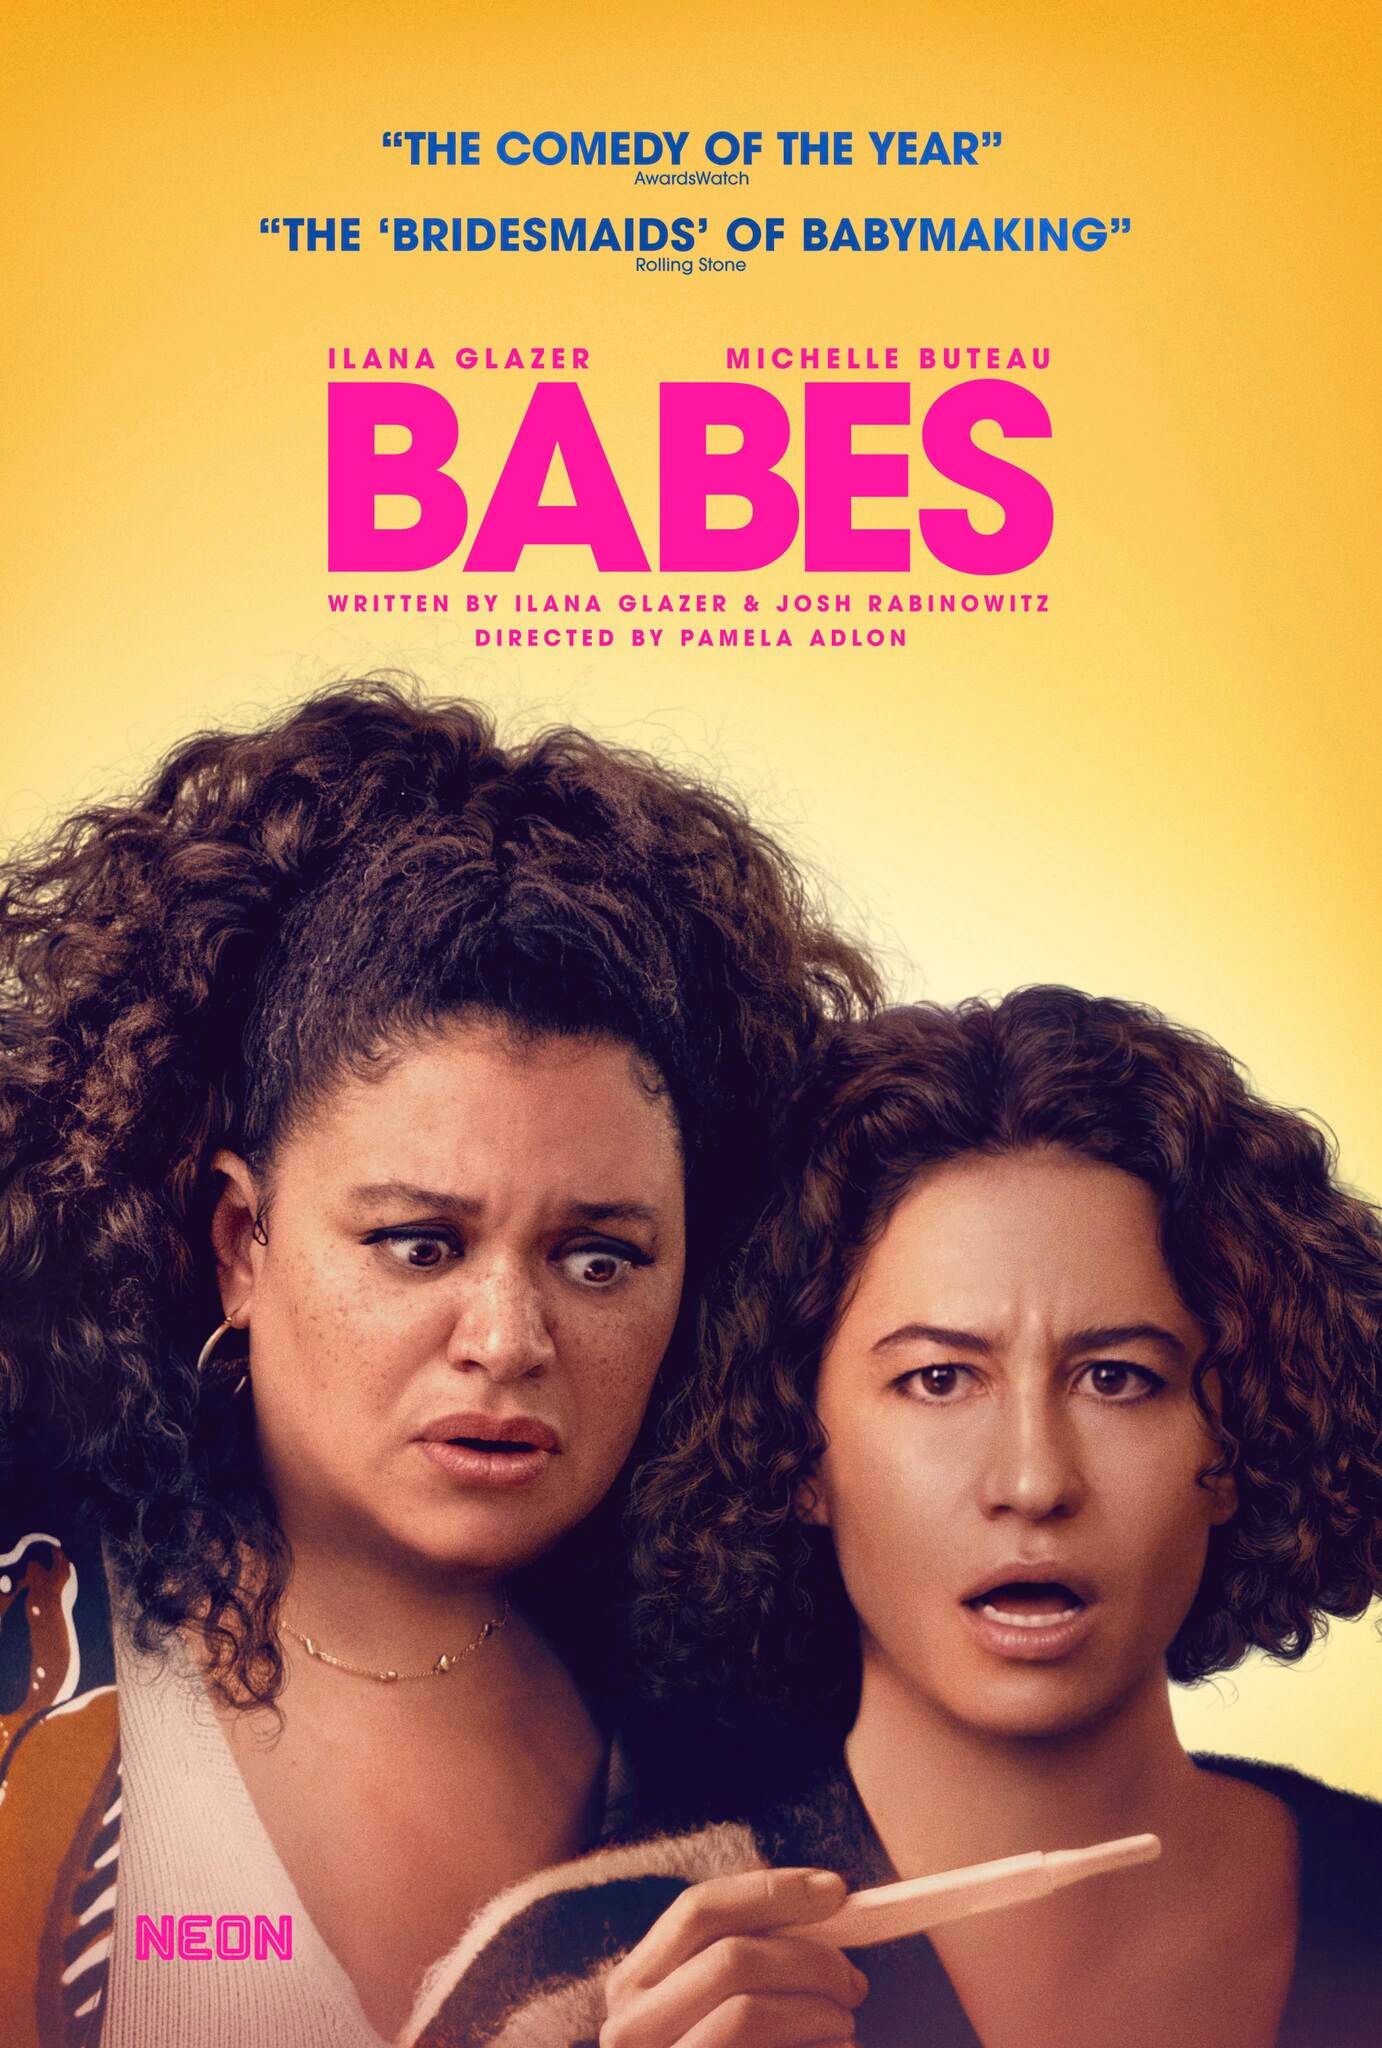 Babes Movie Poster Showing Ilana Glazer and Michelle Buteau Holding a Pregnancy Test